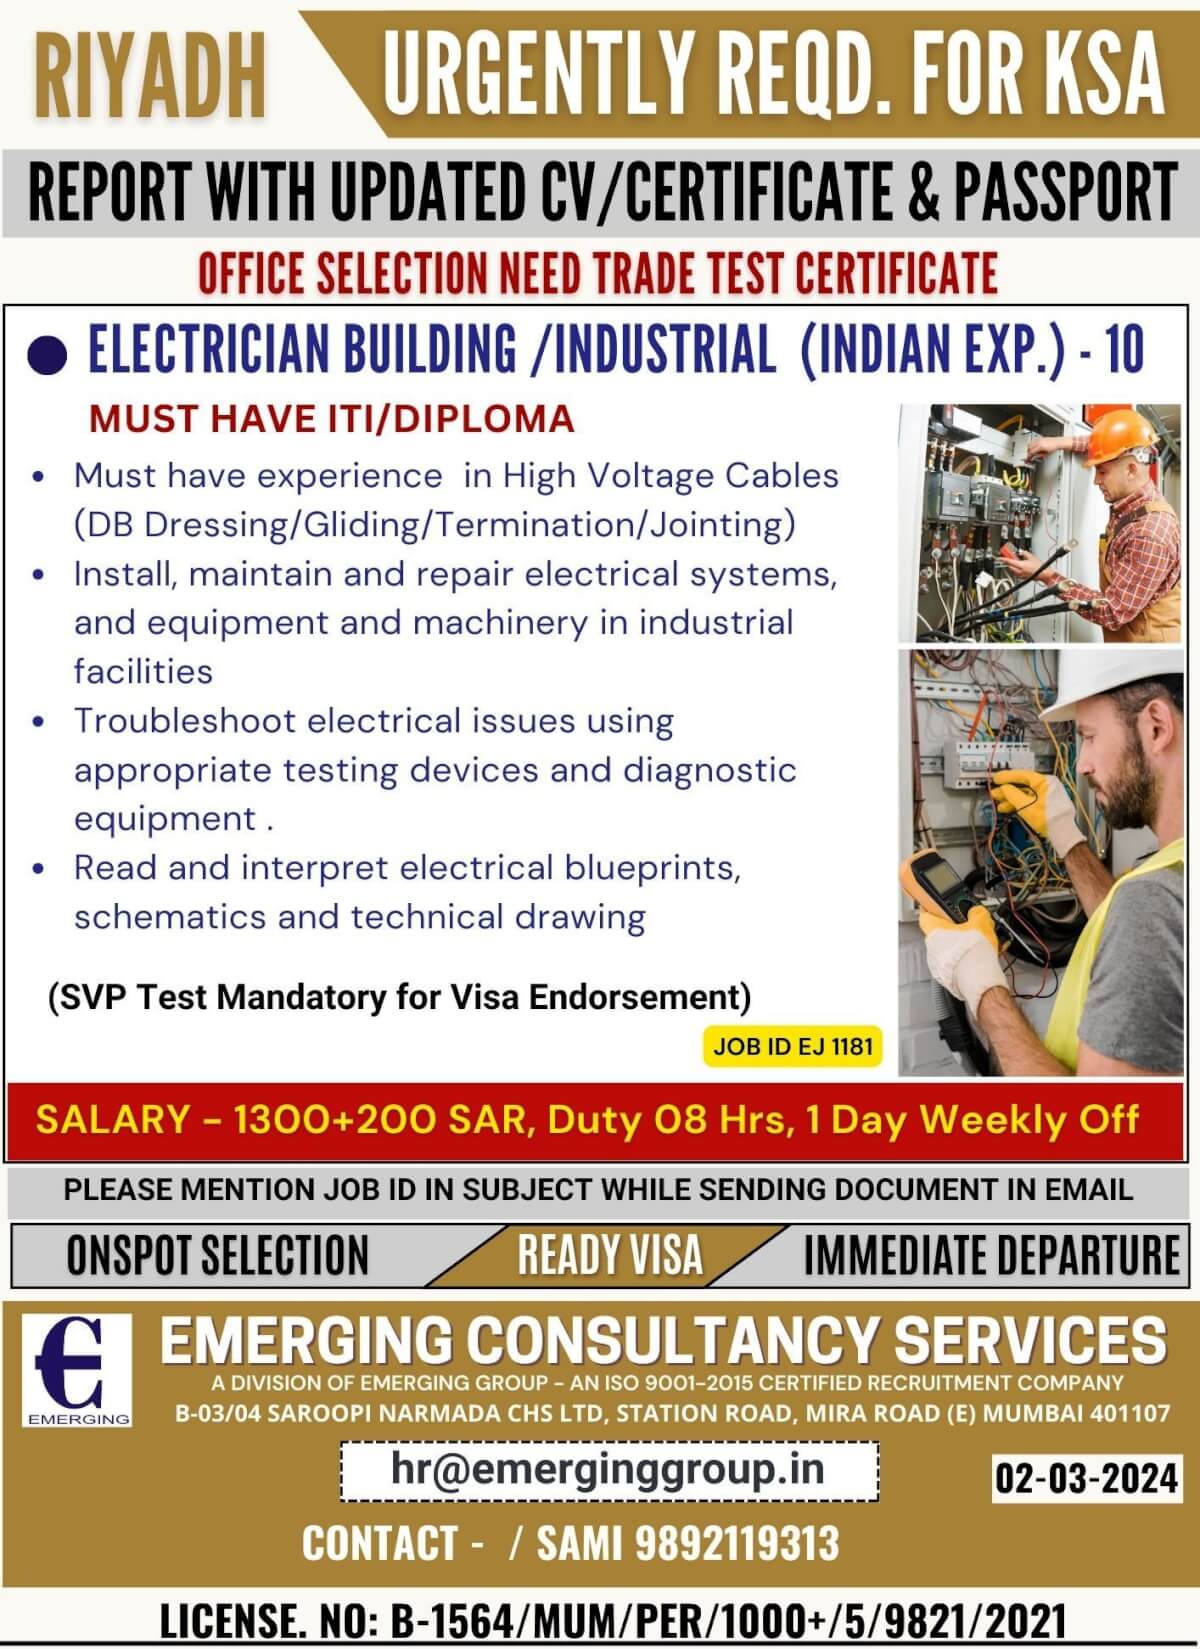 URGENTLY REQUIRED ELECTRICIAN BUILDING /INDUSTRIAL (INDIAN EXP.) FOR LEADING COMPANY IN SAUDI ARABIA